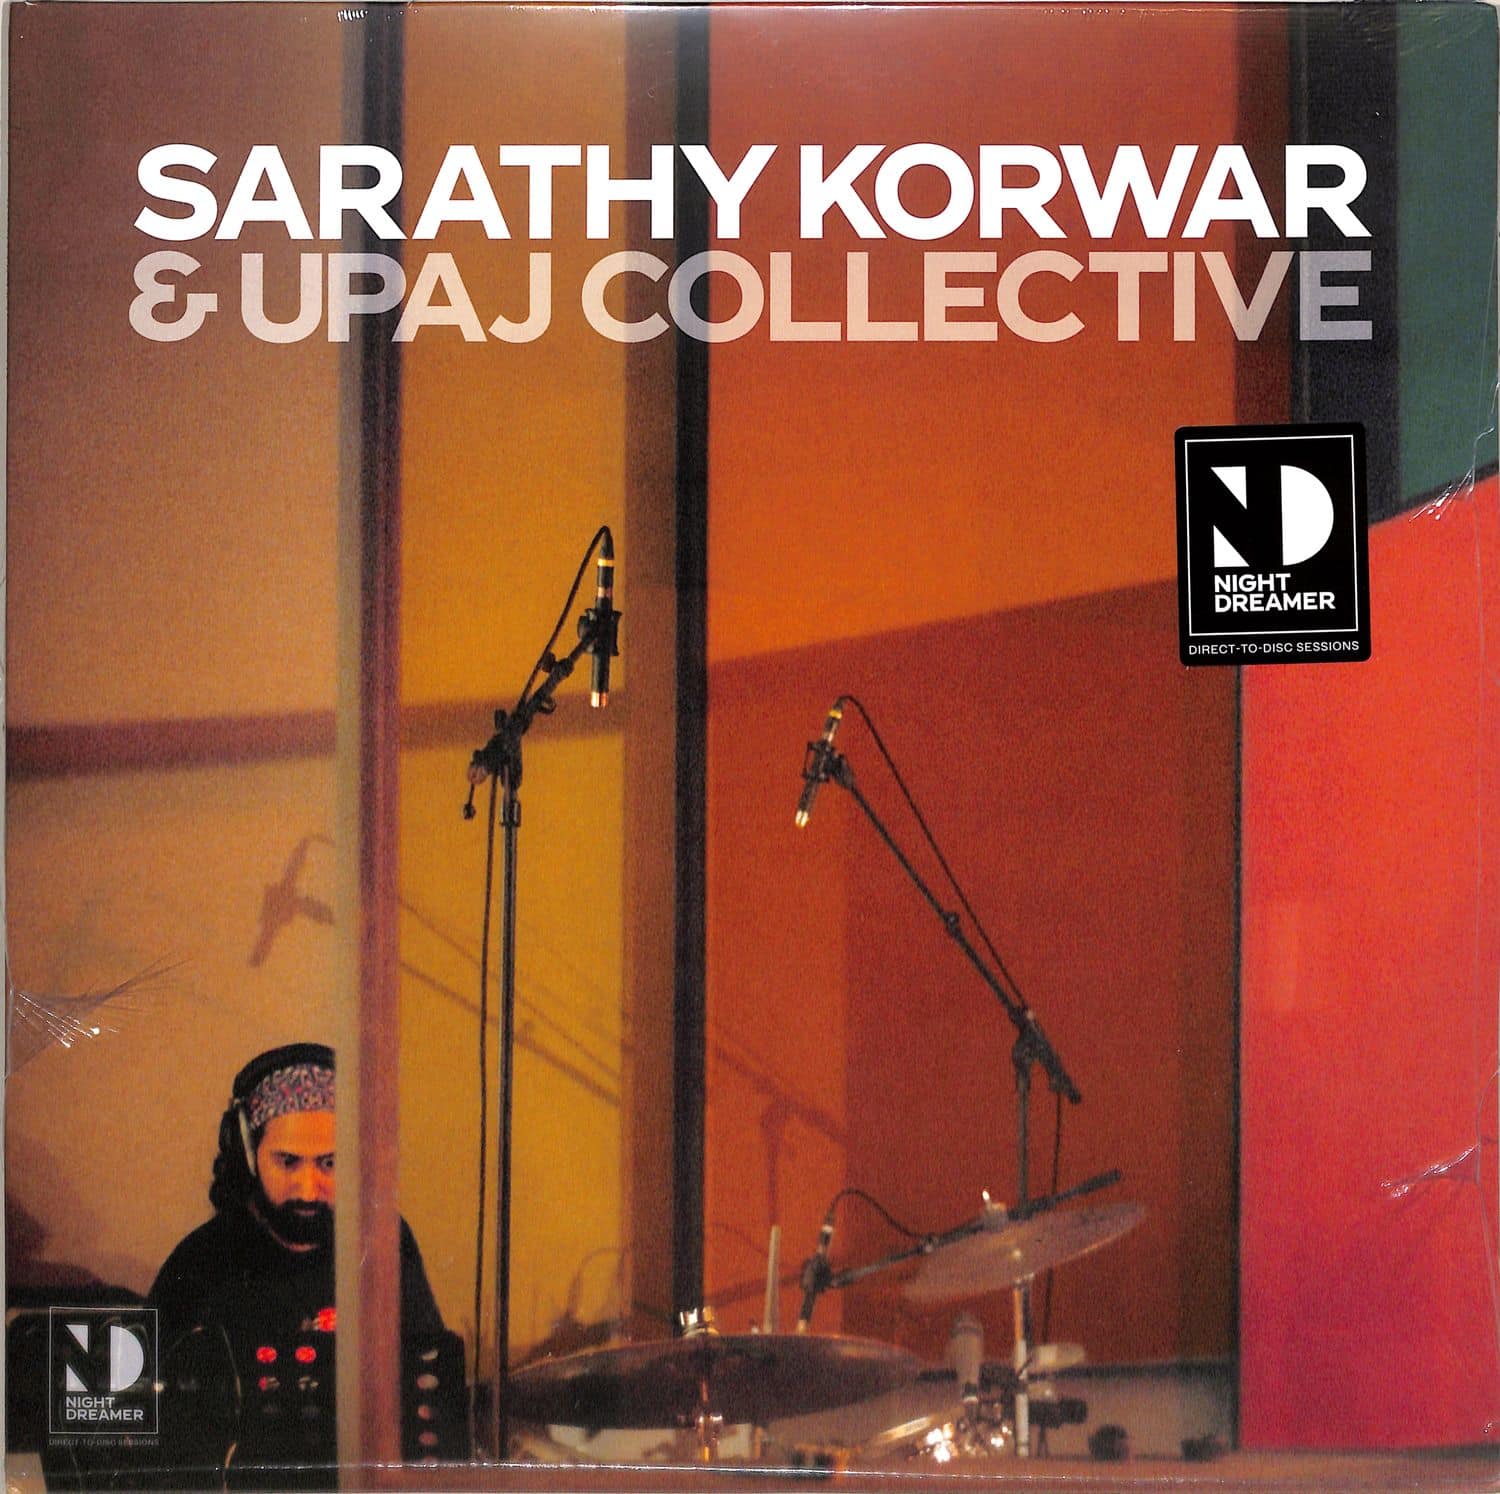 Sarathy Korwar & Upaj Collective - NIGHTDREAMER DIRECT TO DISC SESSIONS 